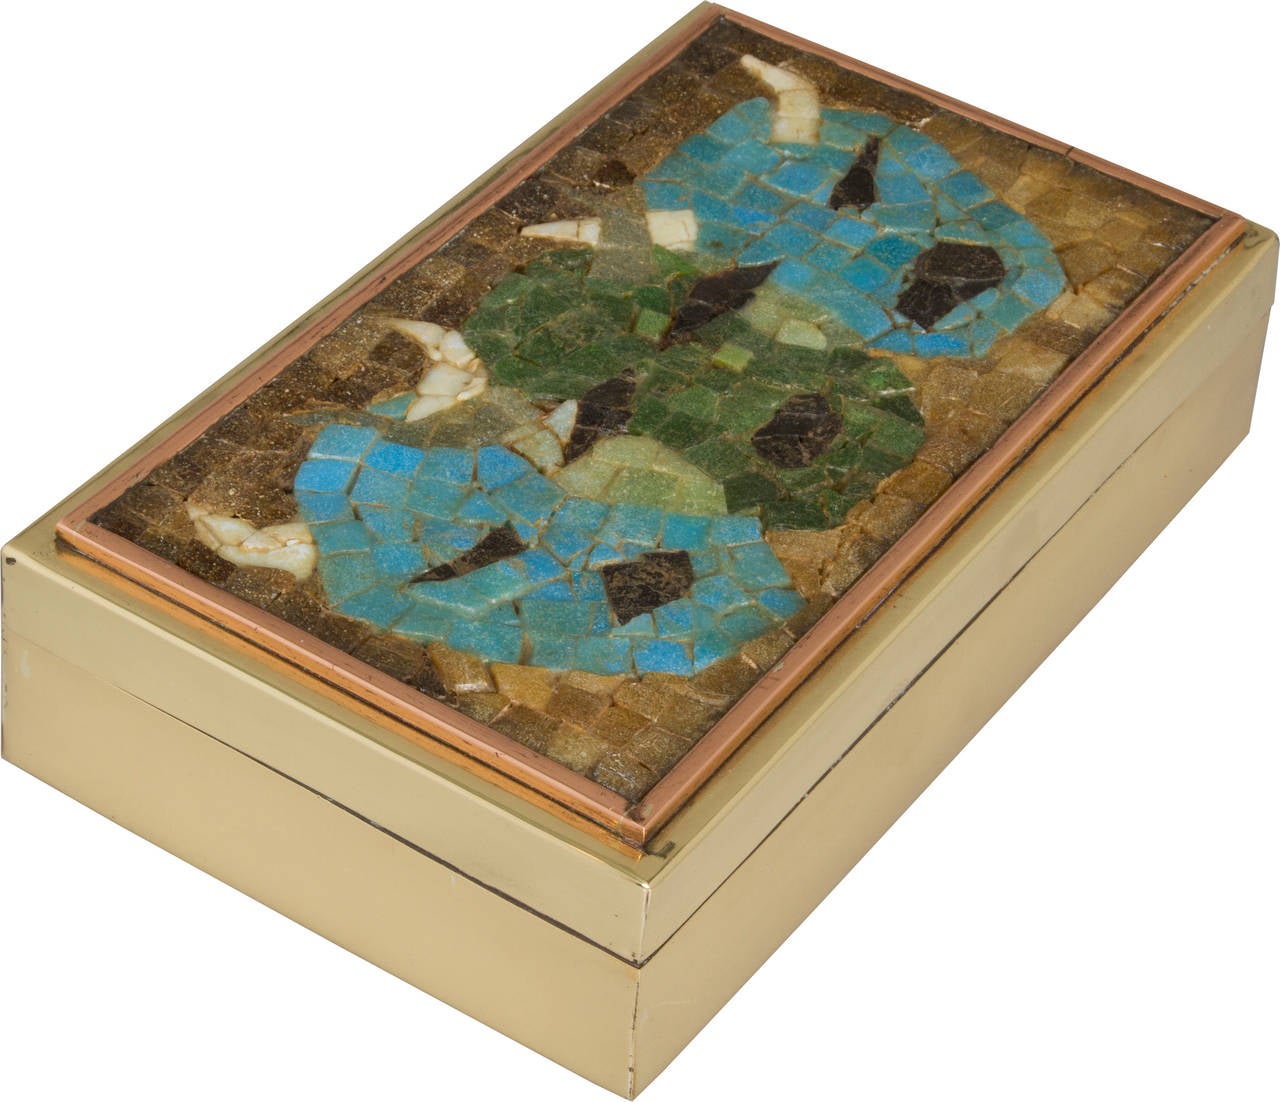 A mosaic of inlaid glass form the top of the box.